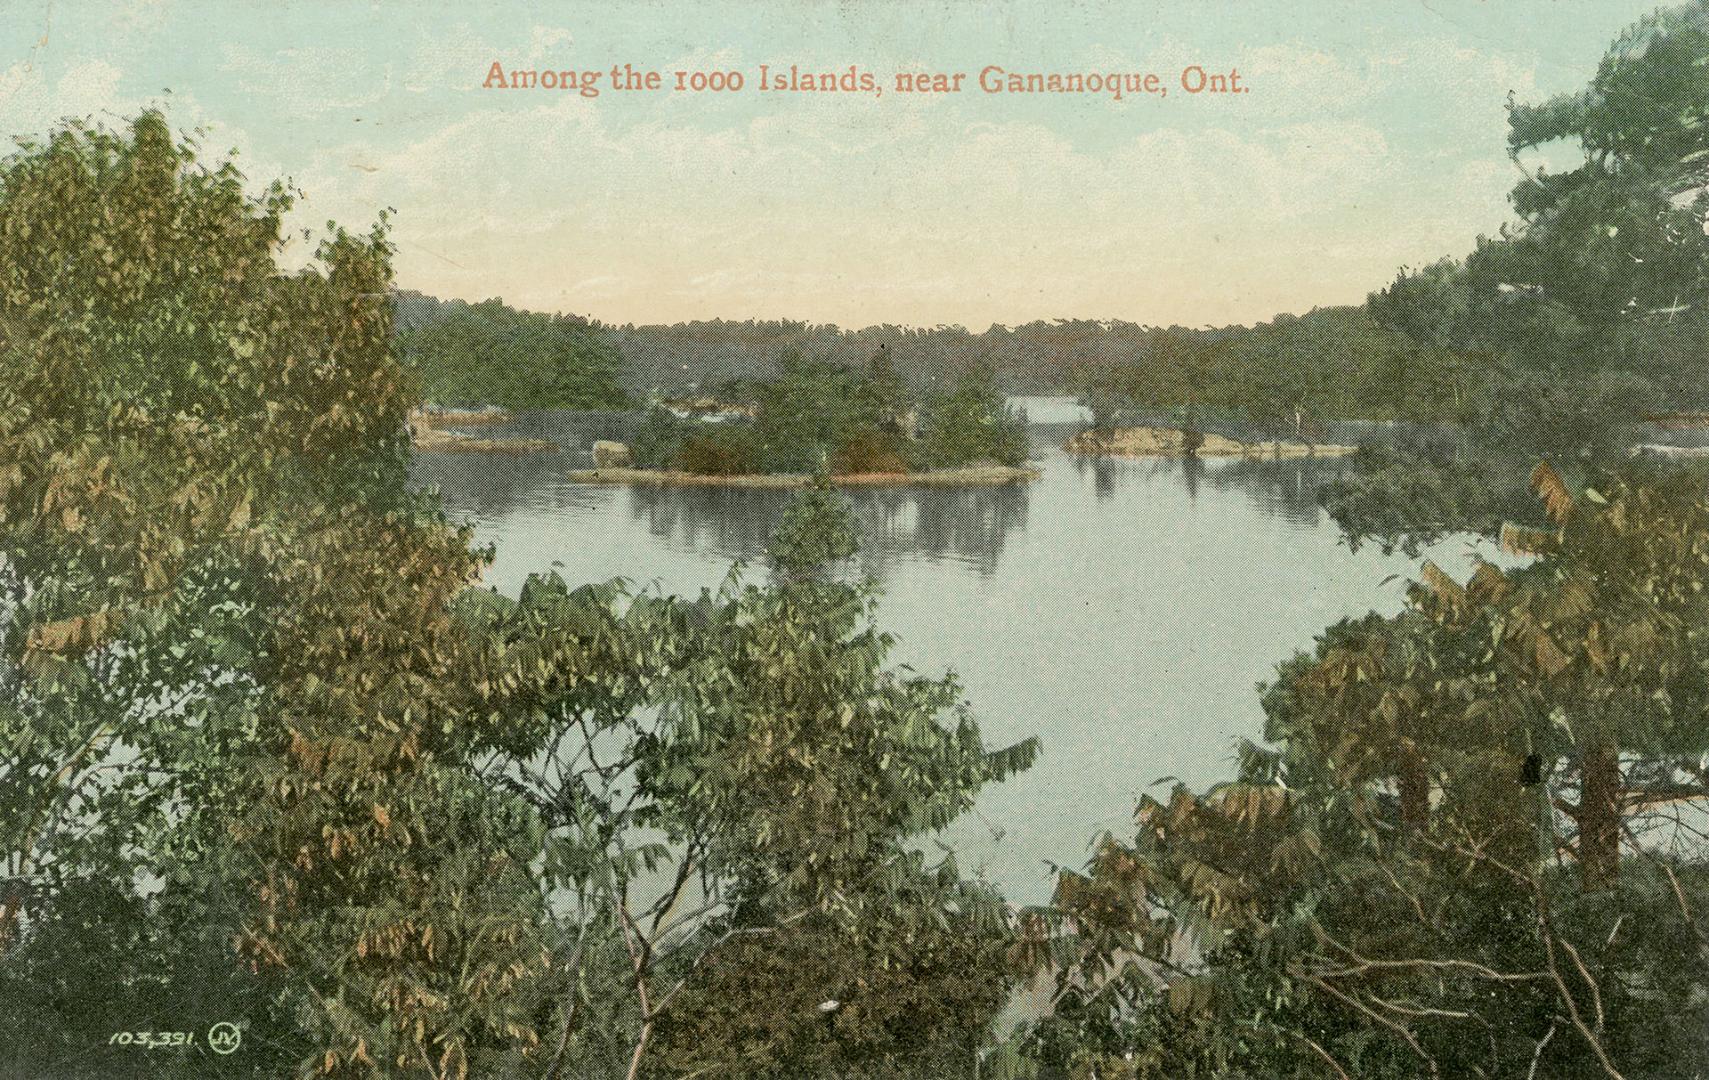 Colorized photograph of an island within a large river.